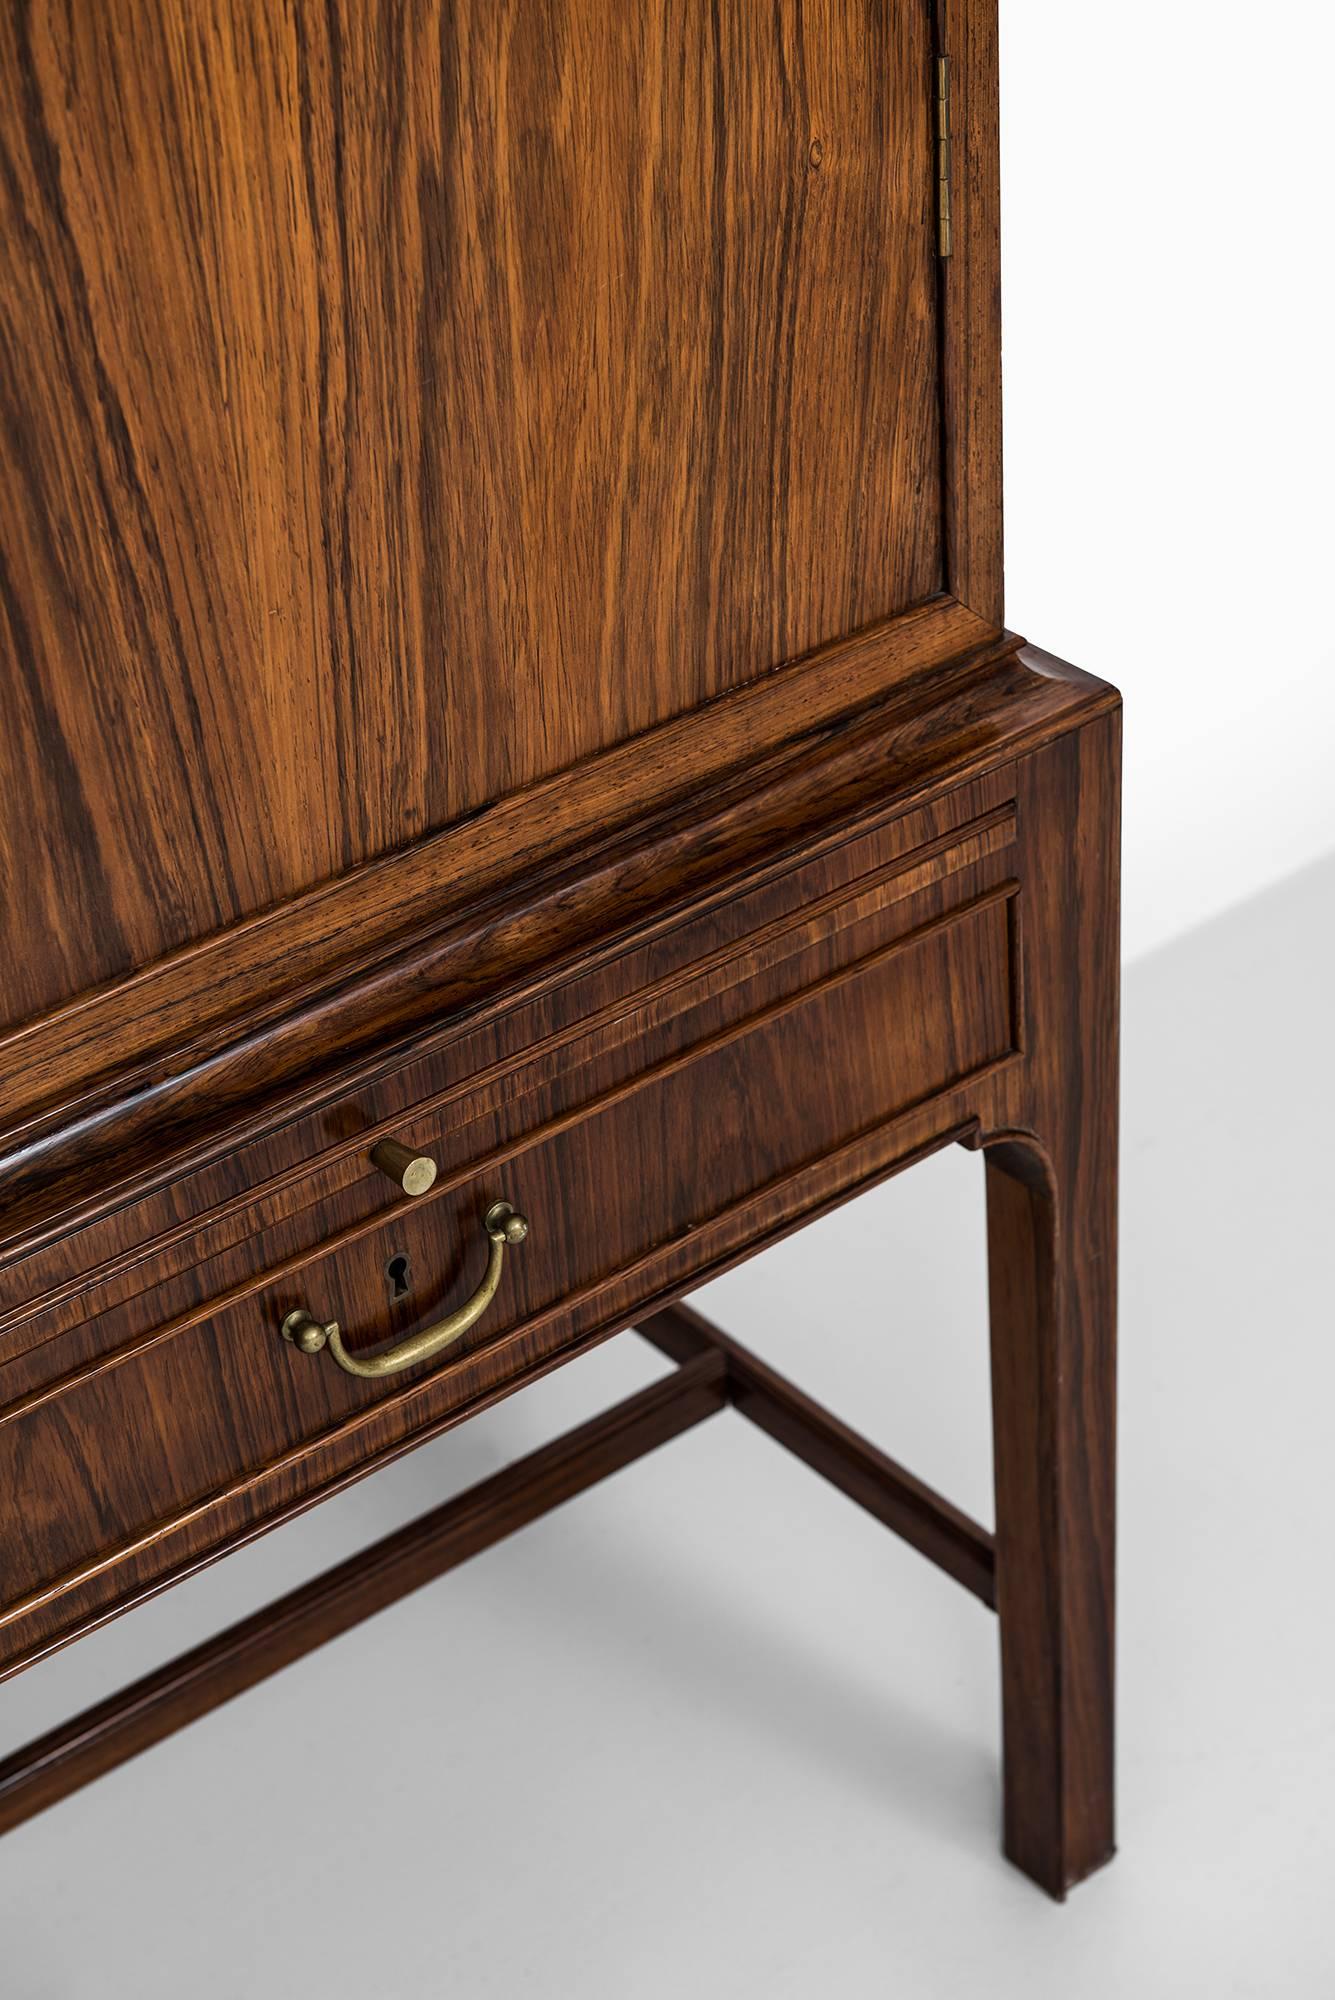 Danish Master Cabinet Attributed to Kaare Klint and Produced by Cabinetmaker C.B Hansen